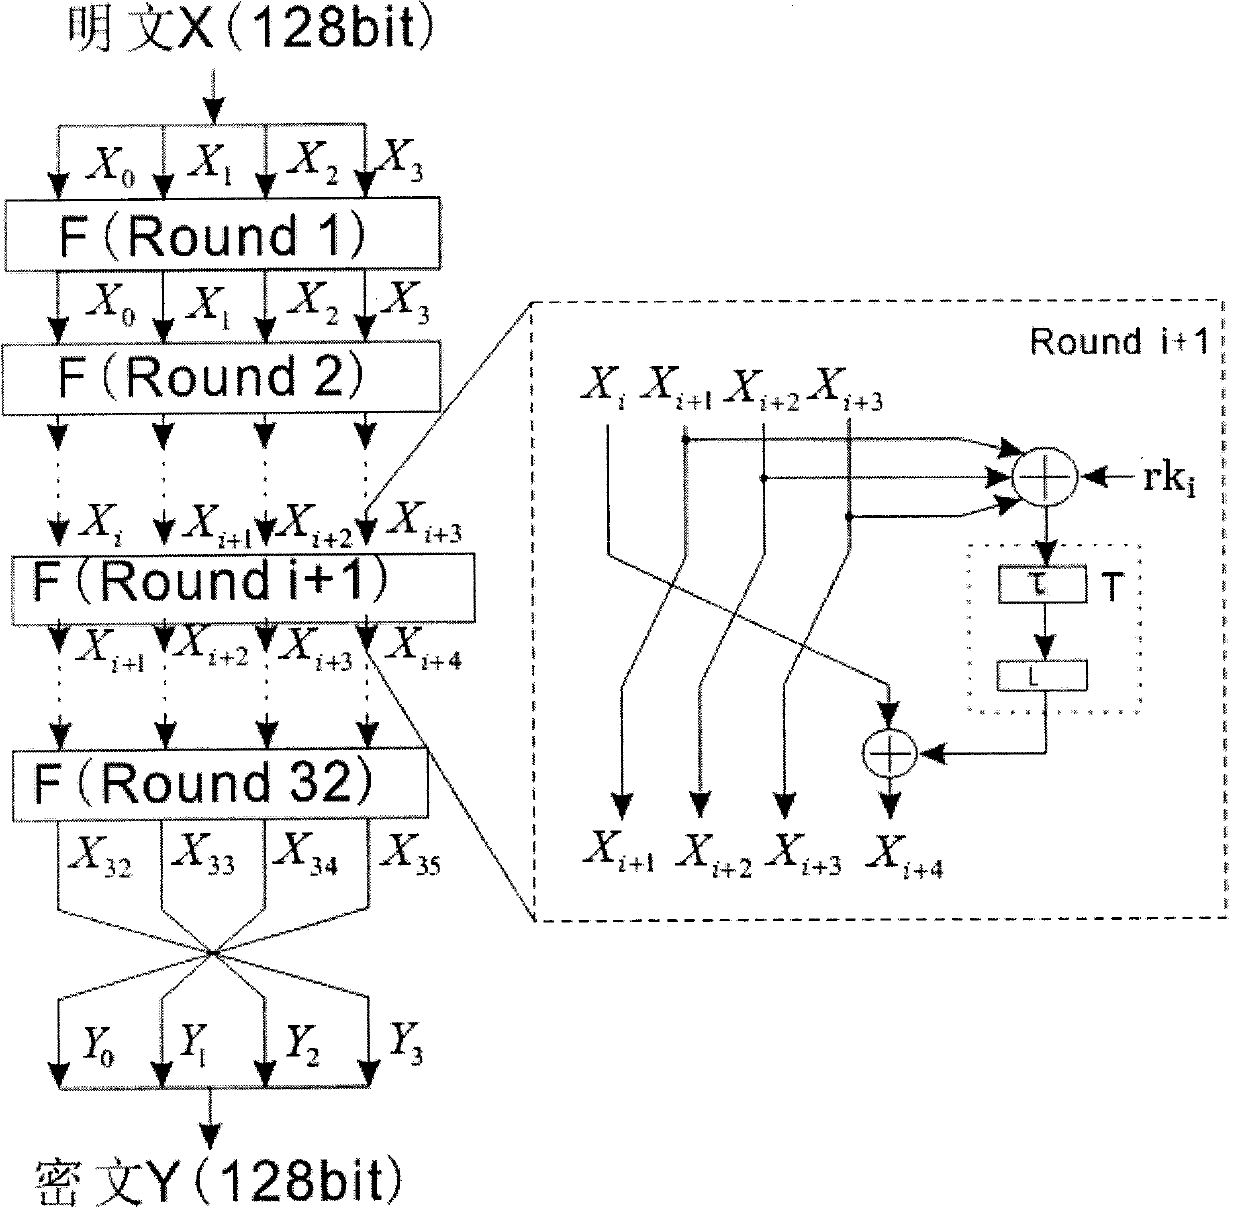 A method of choosing plaintext or ciphertext side-channel energy analysis attack on round function output of sm4 cipher algorithm